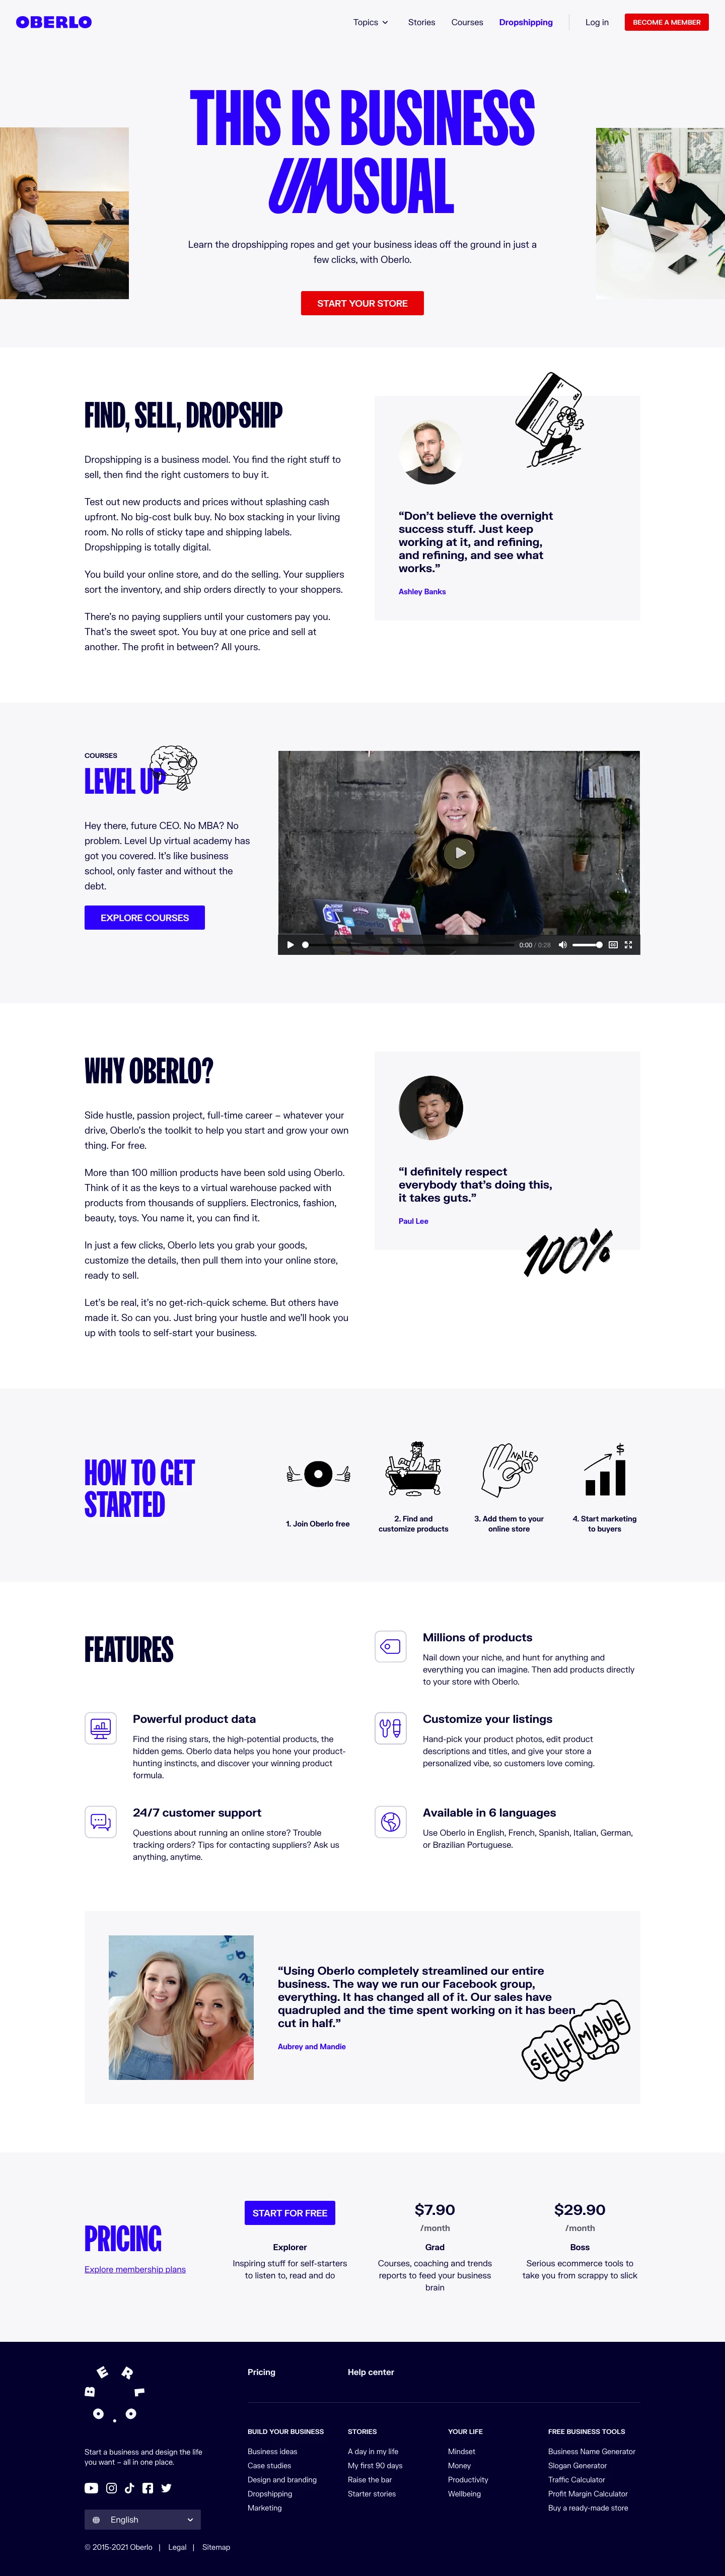 Oberlo Landing Page Example: Get your hands dirty and start something today. Oberlo membership unlocks the digital courses, podcasts, ebooks, and dropshipping tools to build your own online empire.